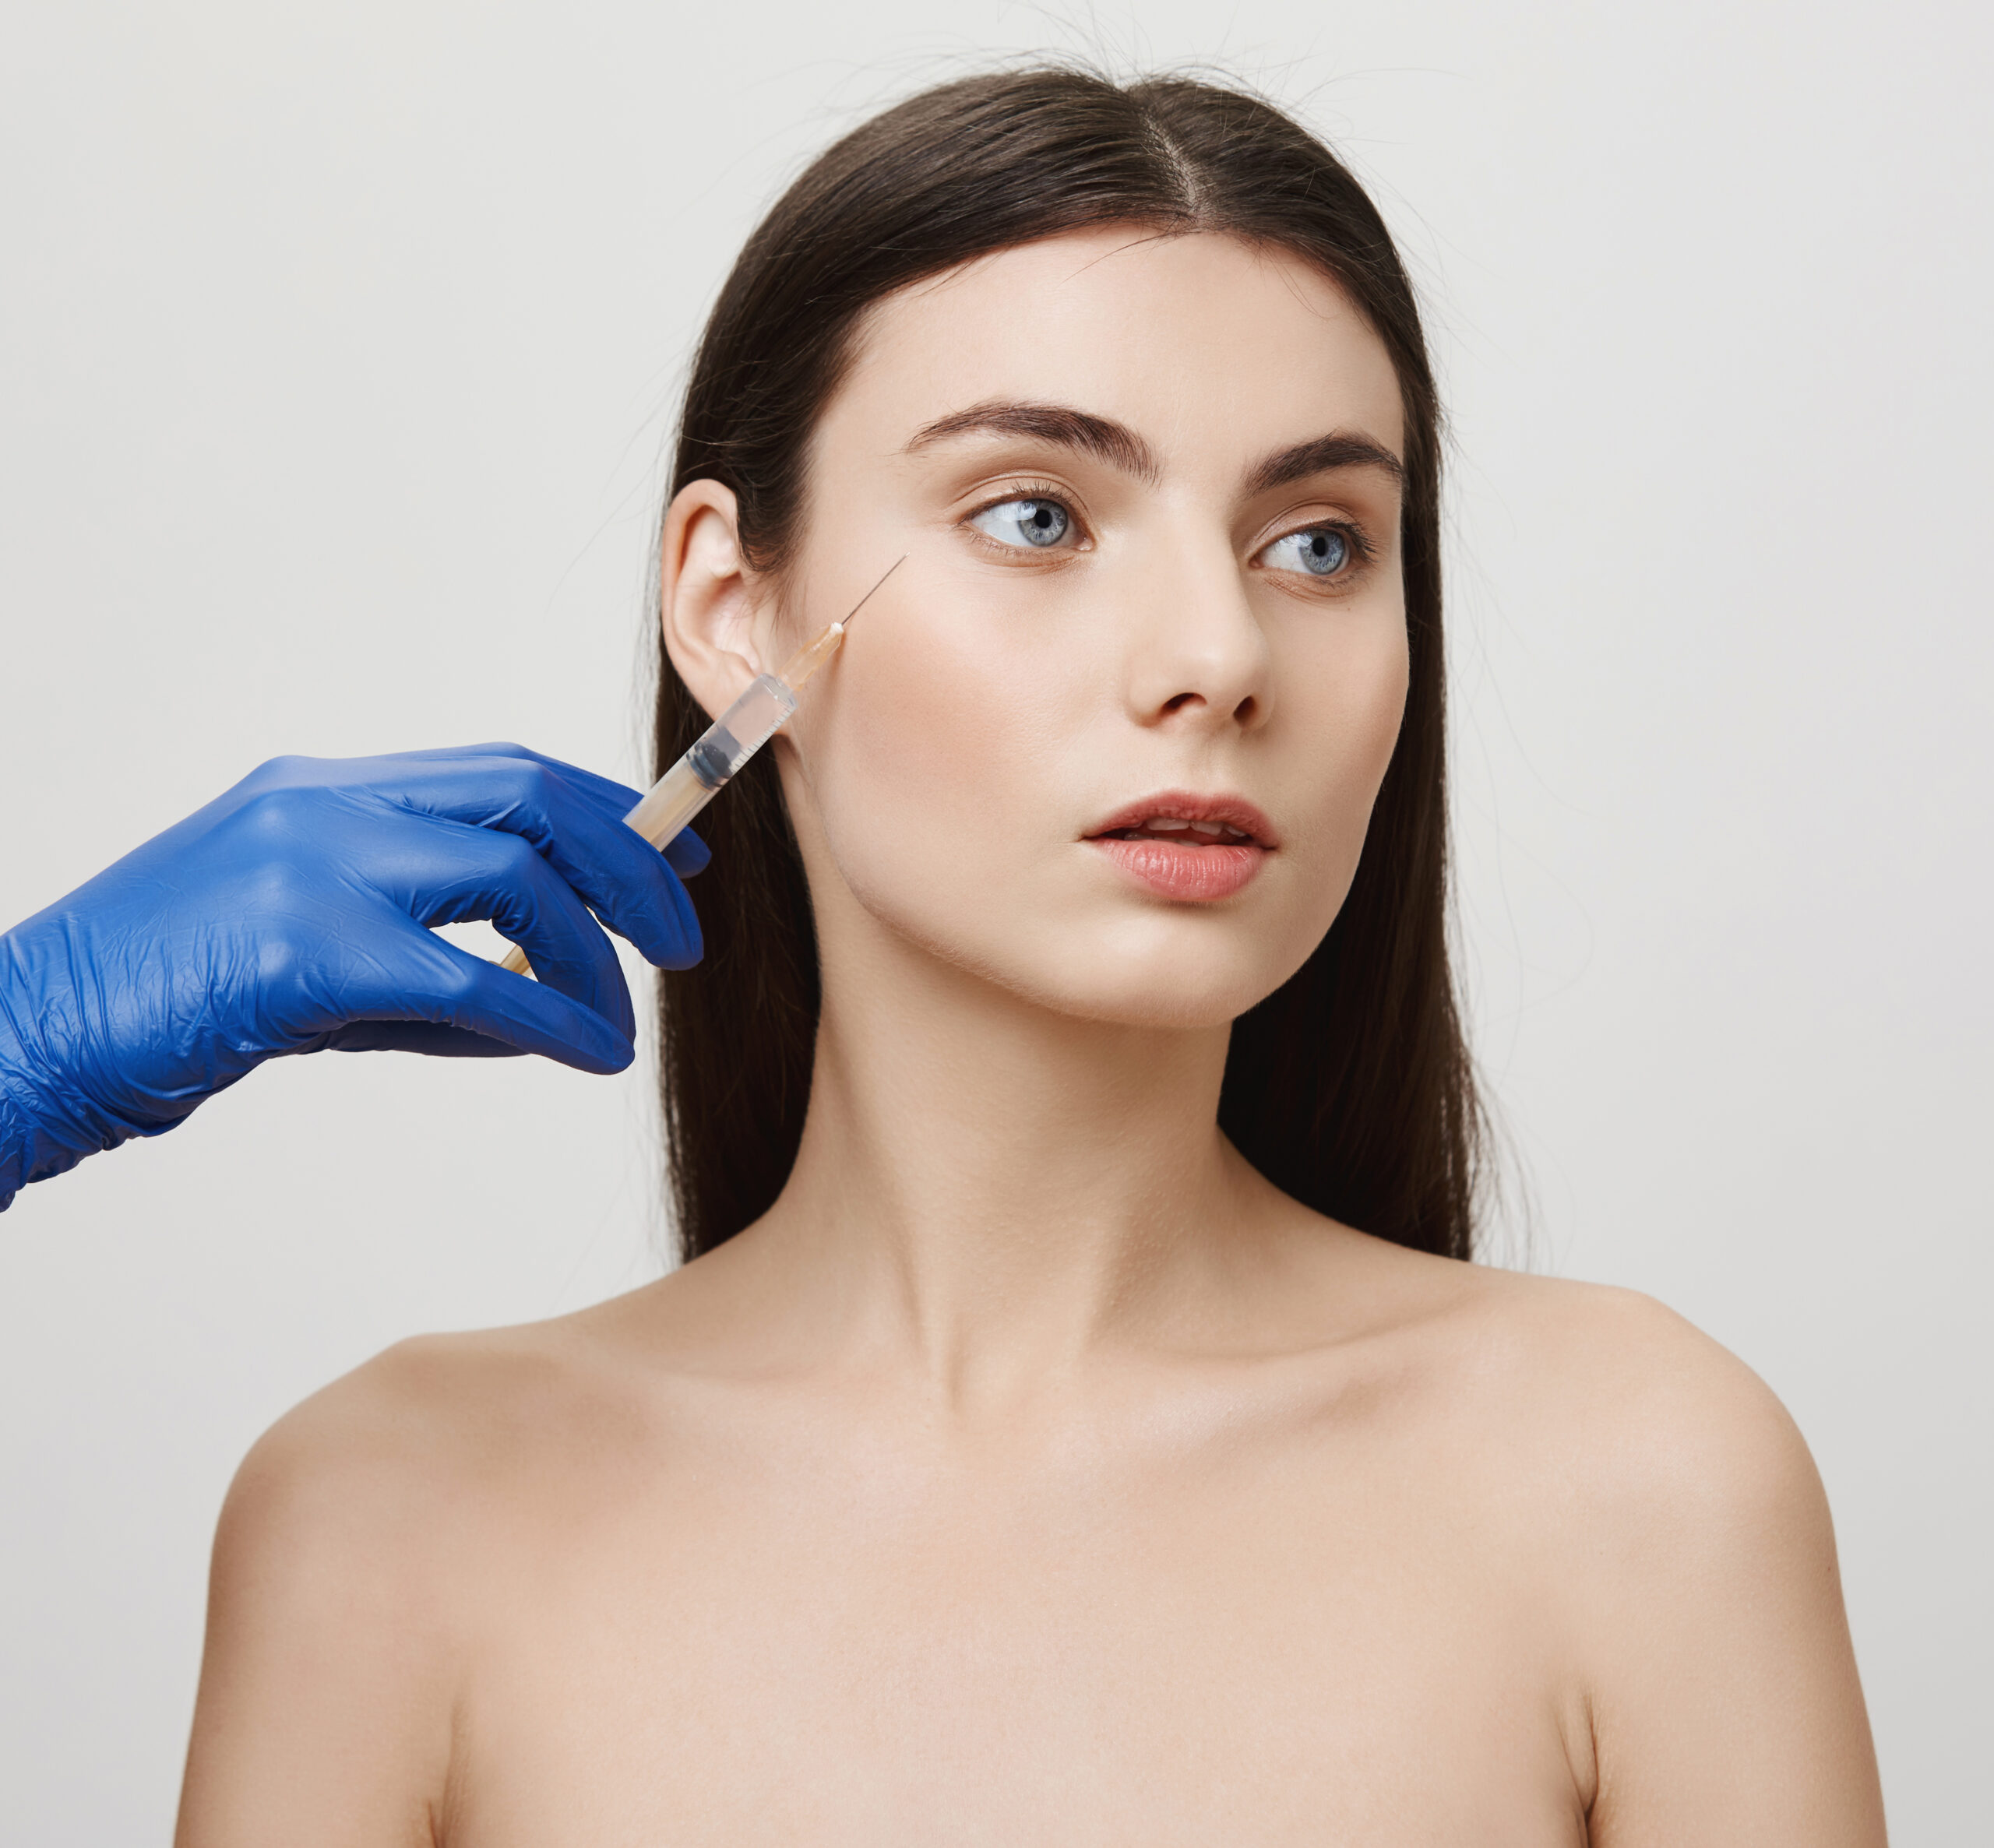 Wrinkles have no chance to exist on this face. Portrait of focused attractive woman standing naked while cosmetologist make injection in cheek for cosmetic purpose, being careful and professional.